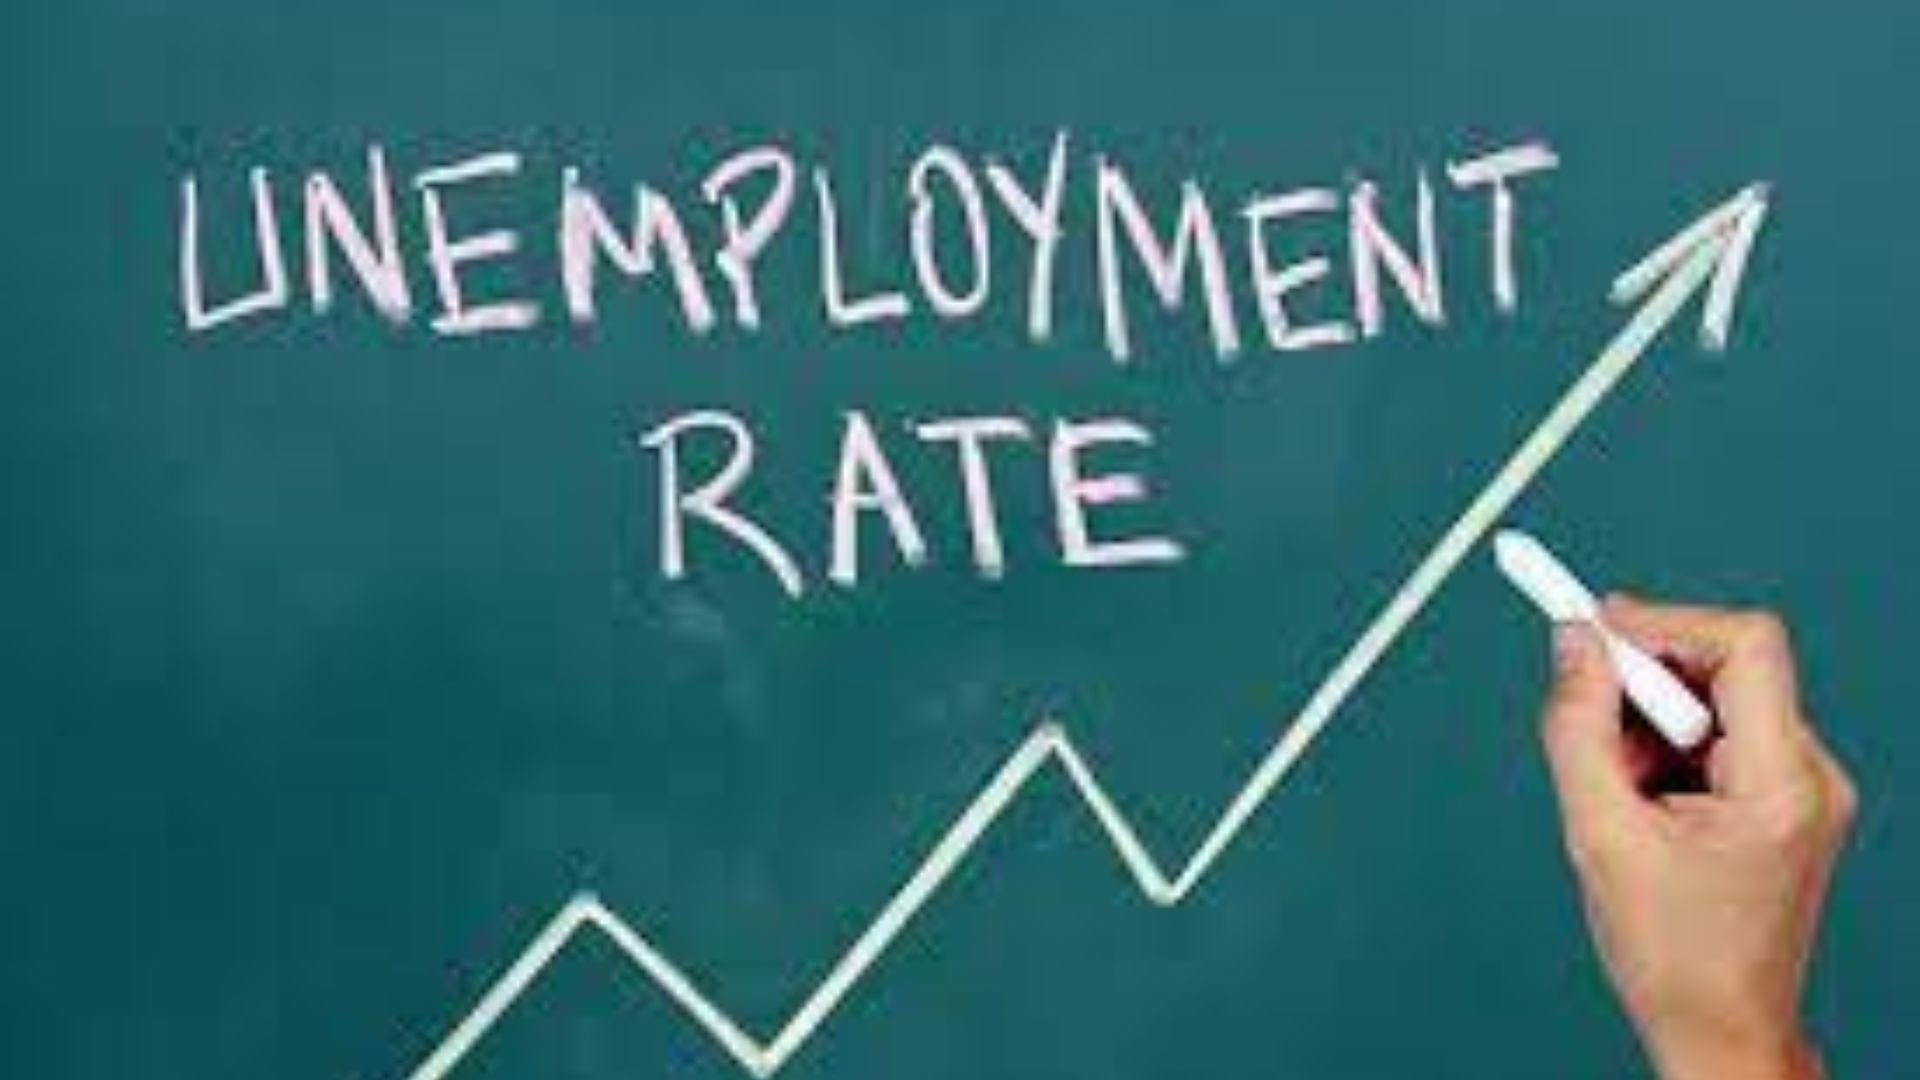 Rising unemployment rate